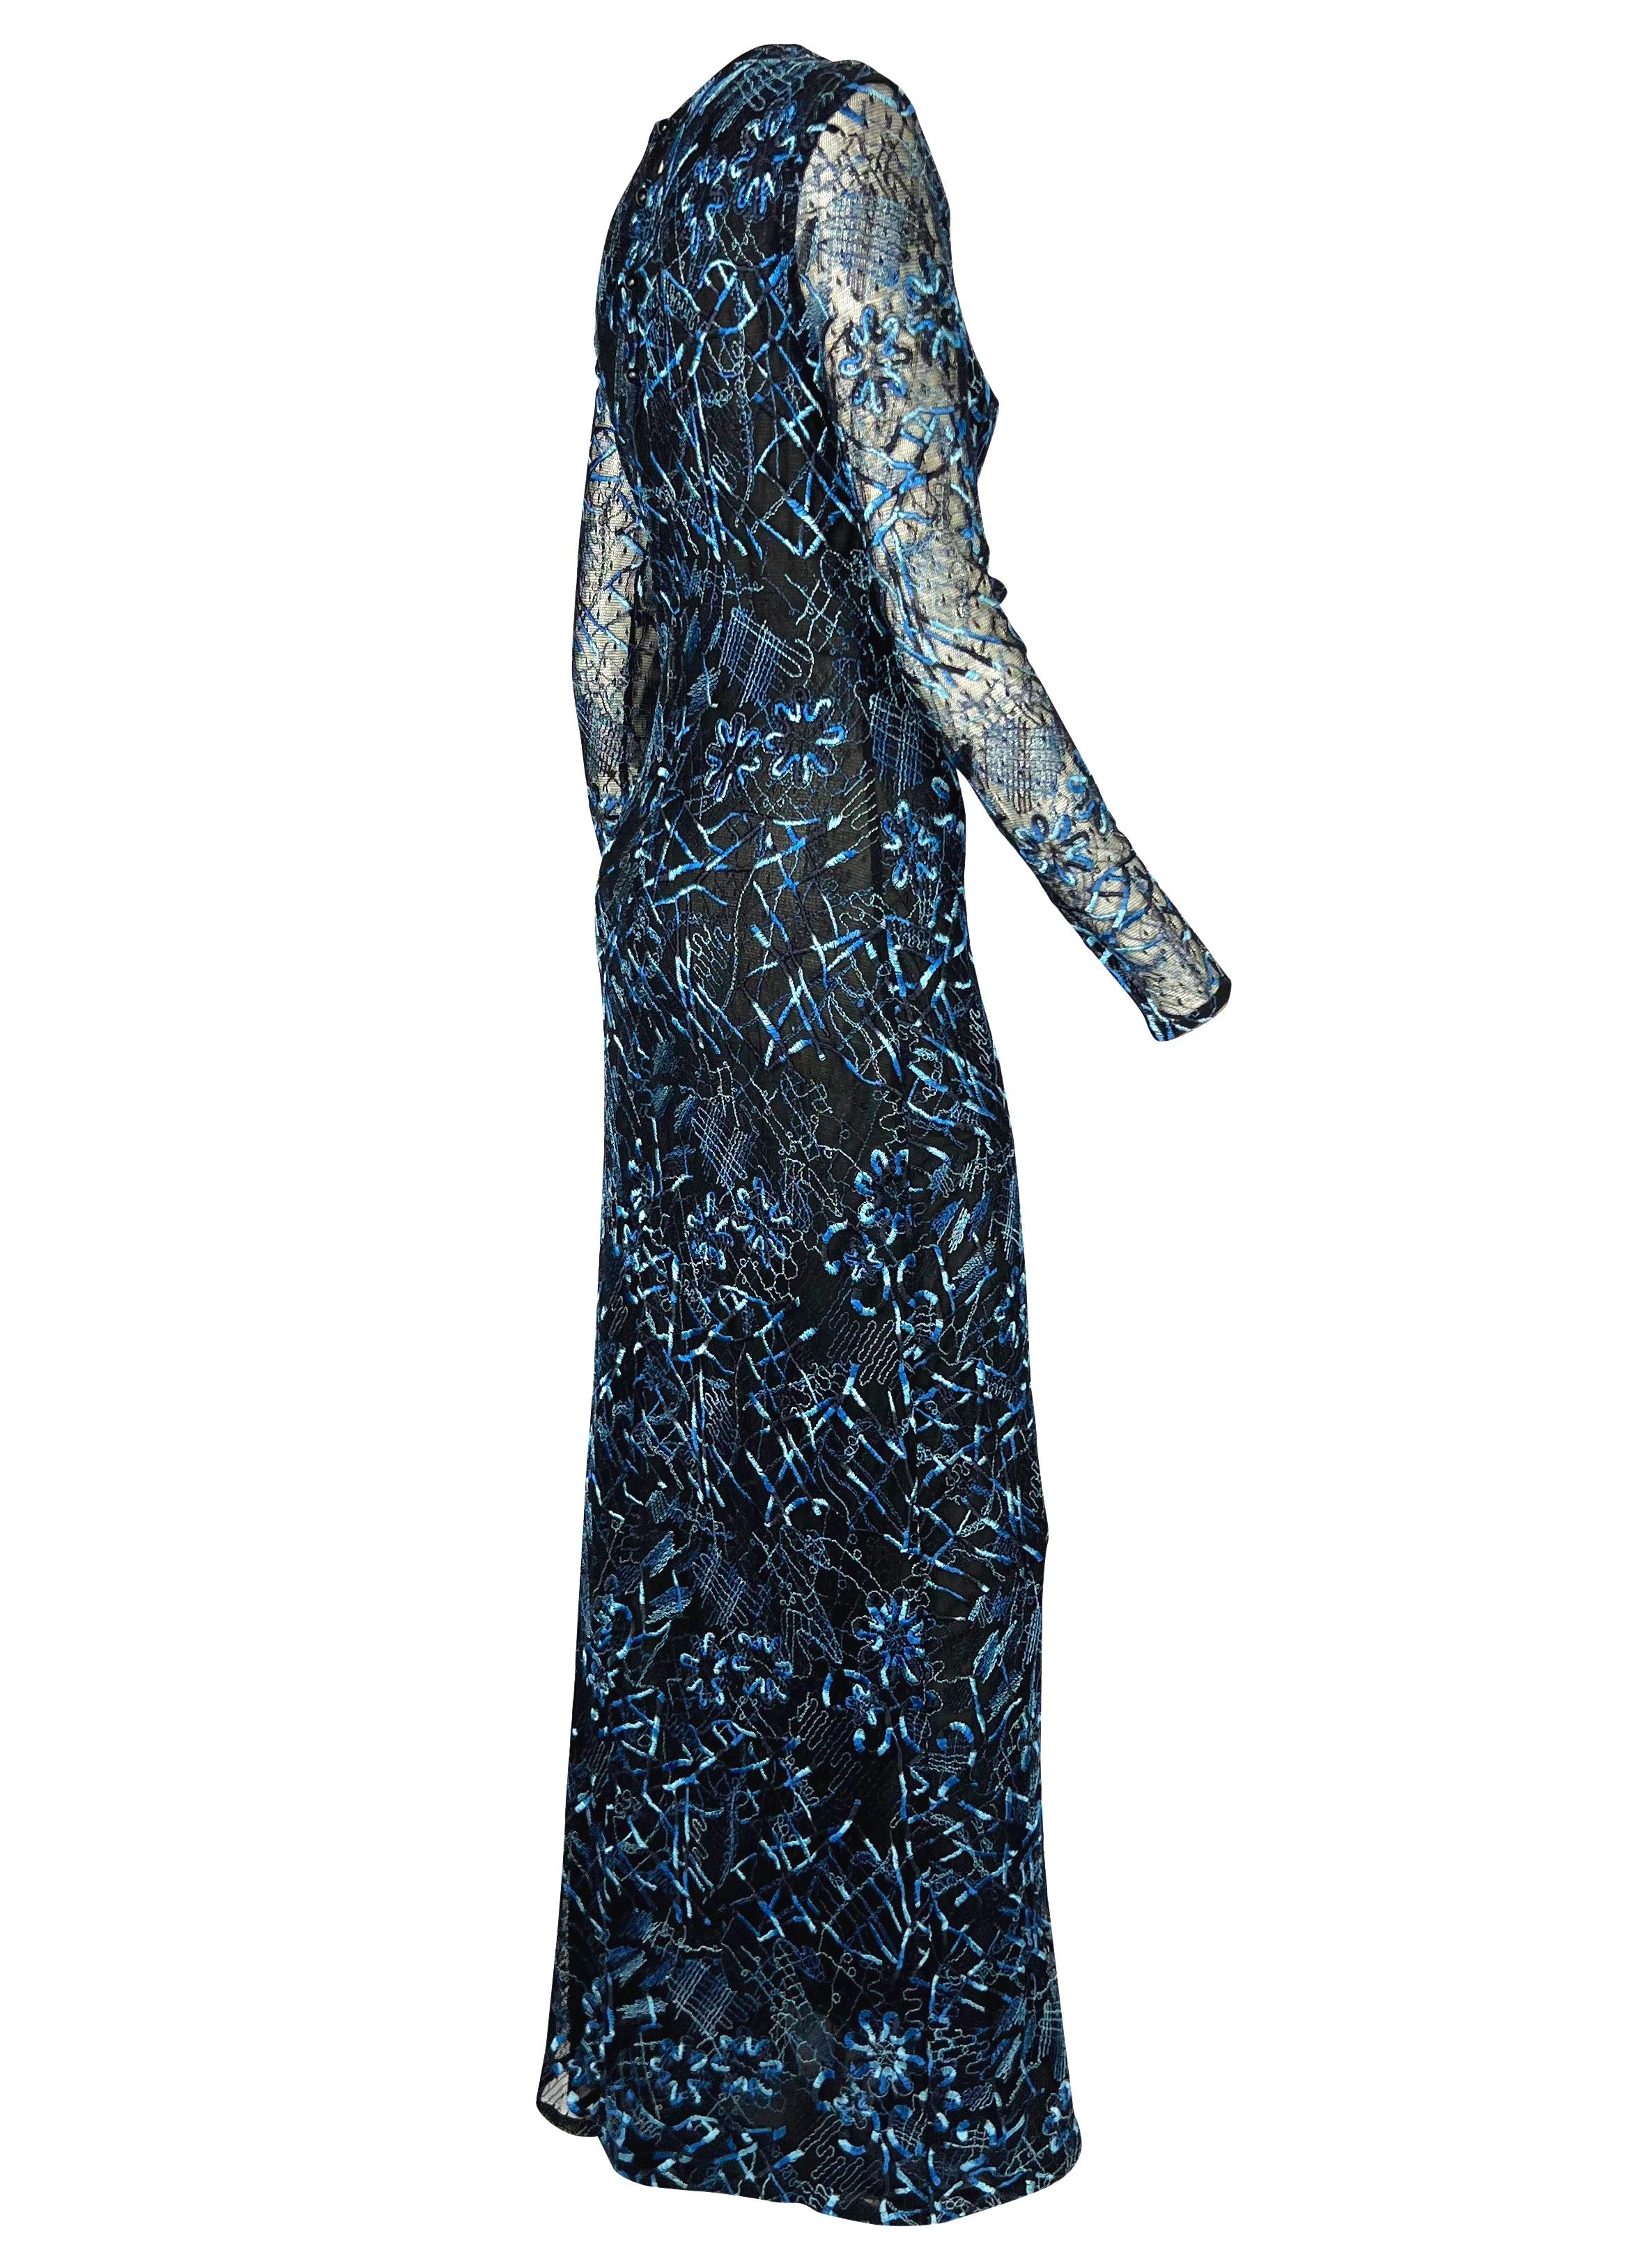 S/S 1998 Christian Lacroix Black Stretch Sheer Mesh Blue Embroidered Maxi Dress For Sale 3